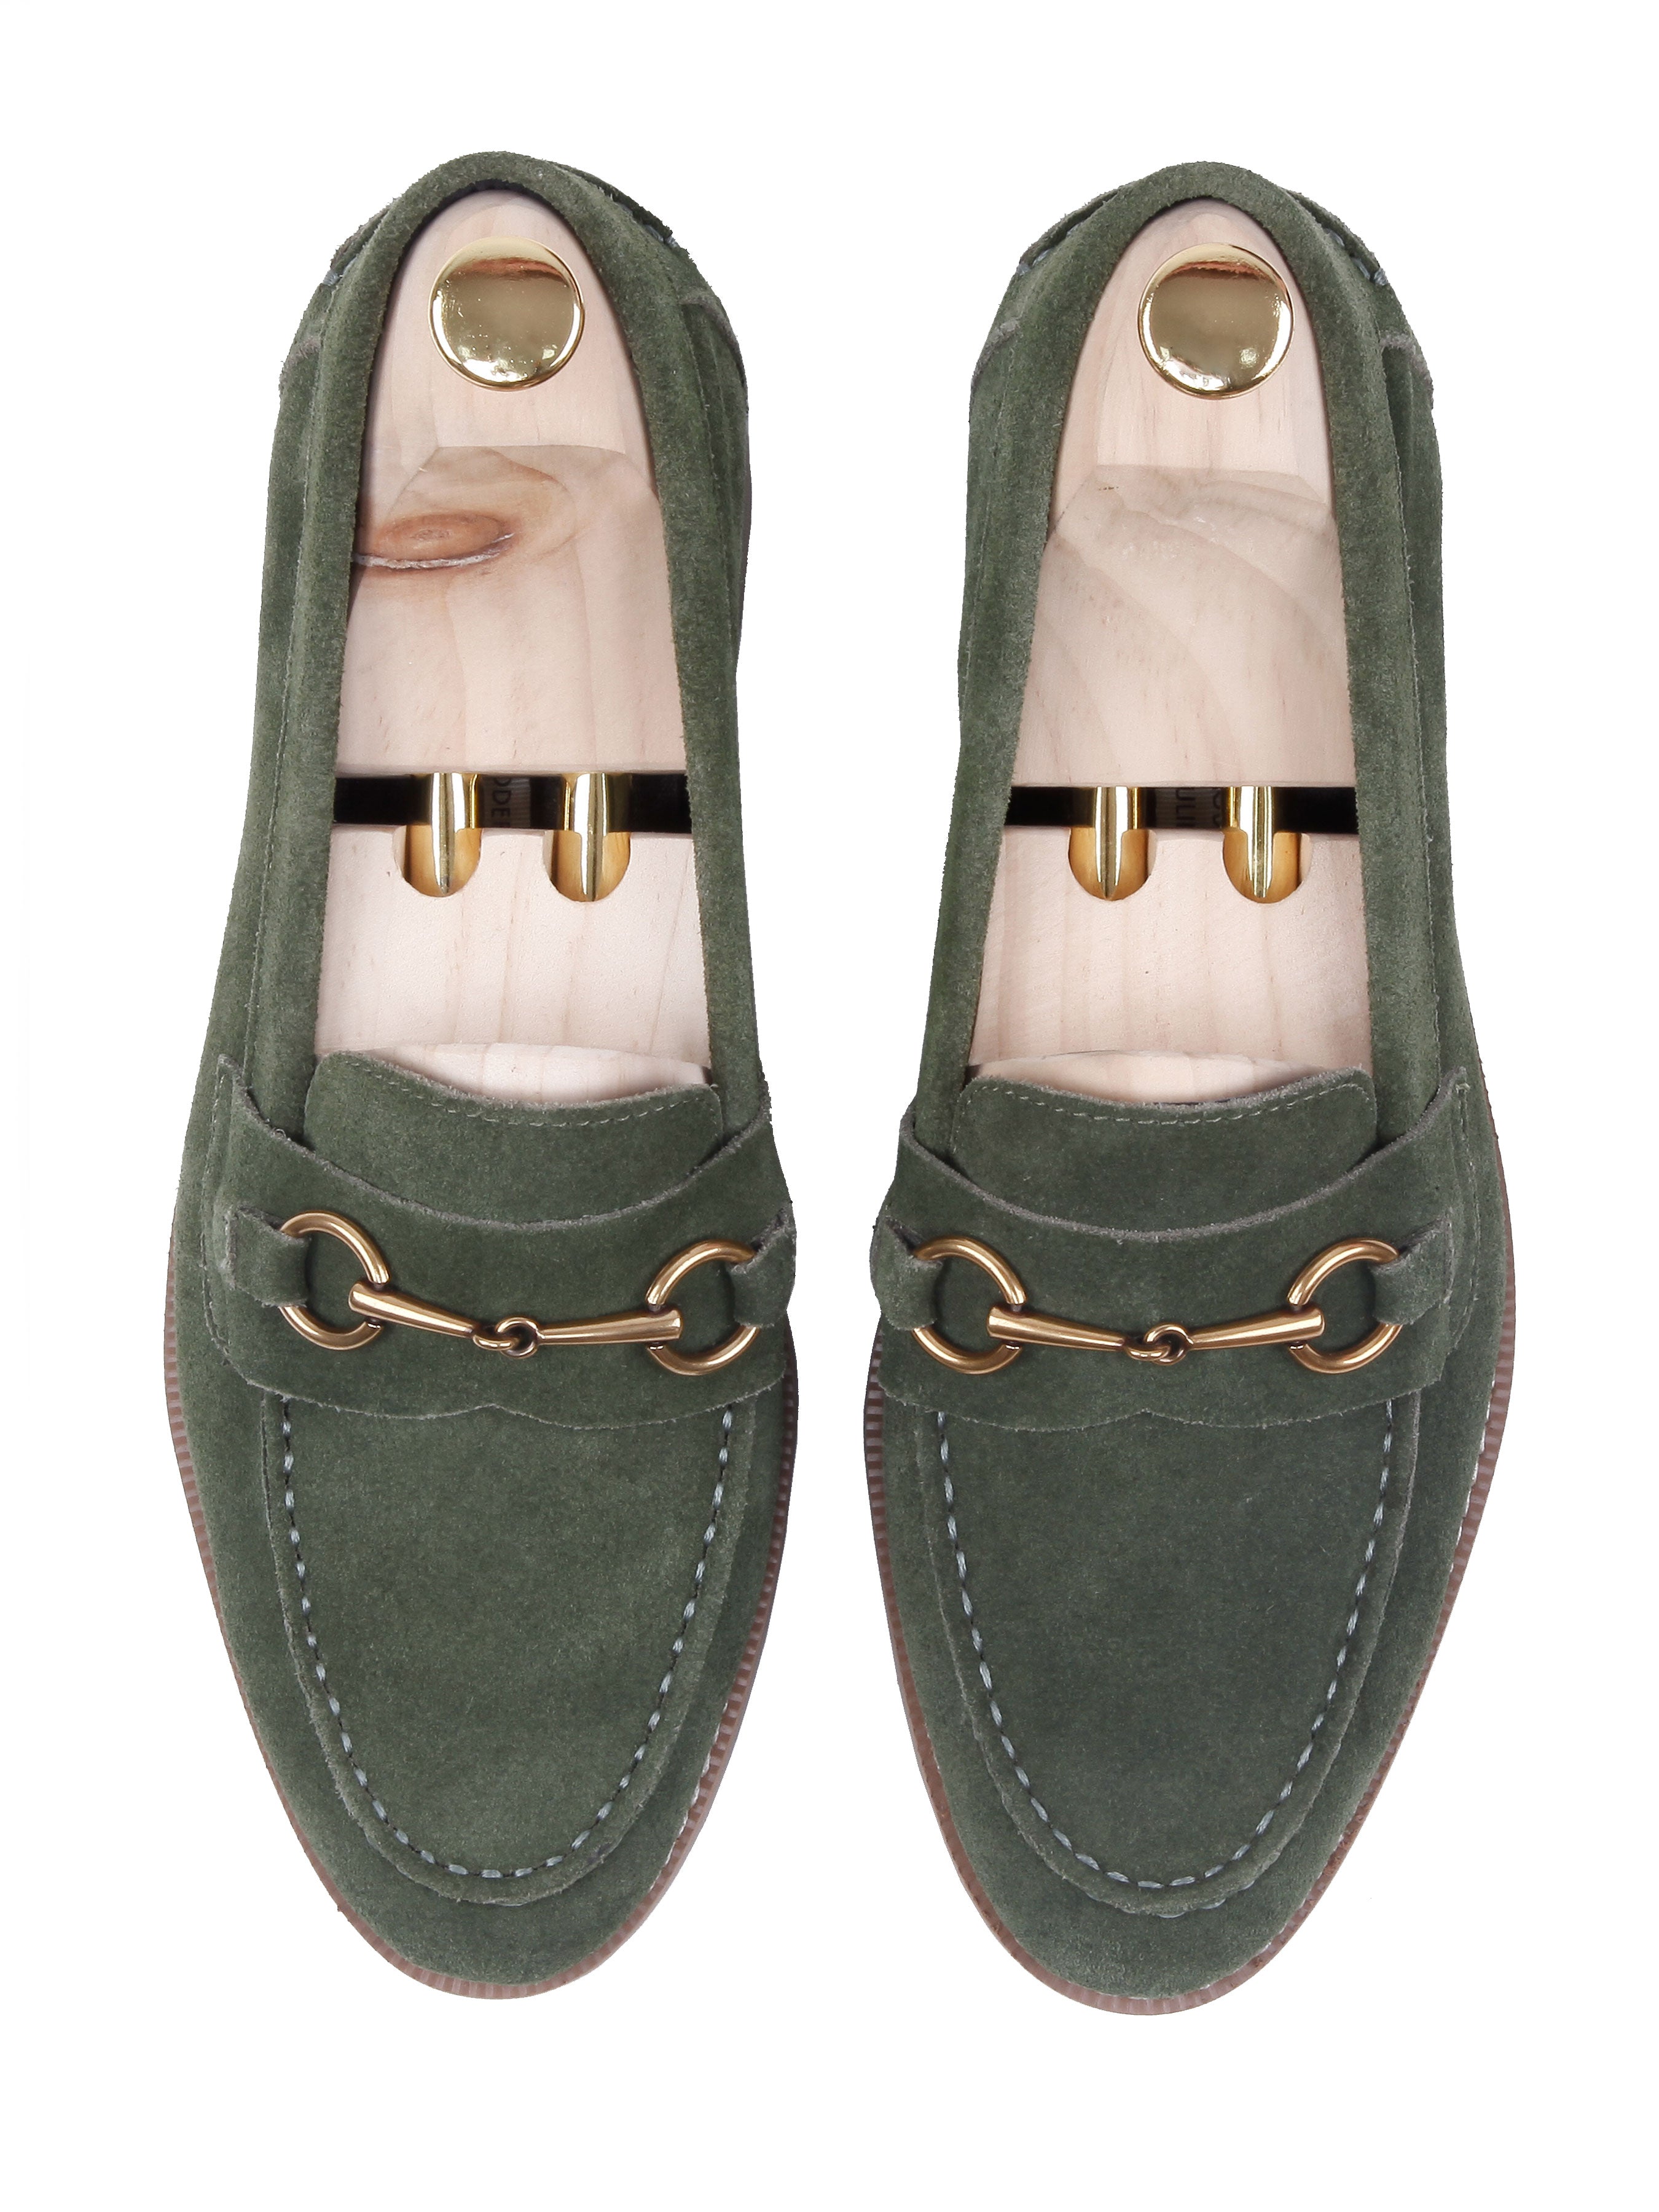 Penny Loafer Horsebit Buckle - Olive Green Suede Leather (Brown Crepe Sole) - Zeve Shoes